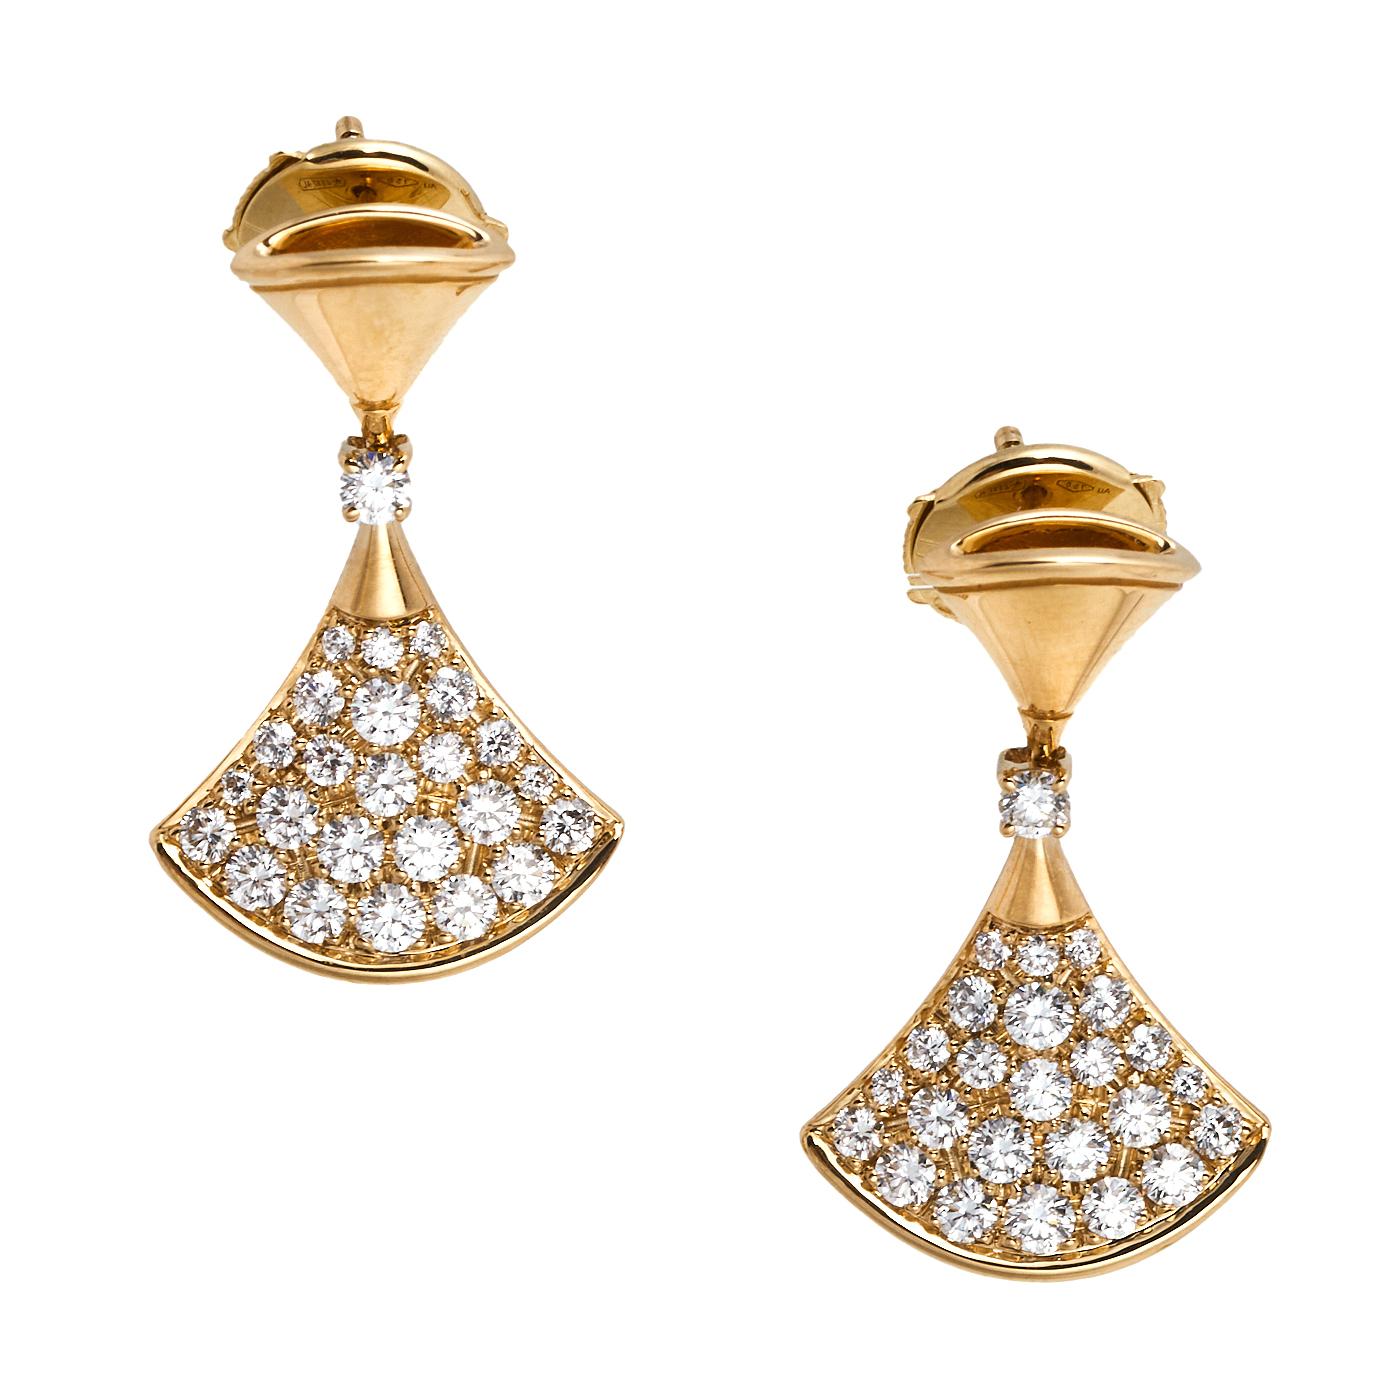 The grandeur of Italian beauty is reflected in these earrings from Bvlgari's Divas' Dream collection. The line is inspired by the fan-shaped mosaics of the Caracalla Baths in Rome, a detail the brand has interpreted with mastery. The earrings are